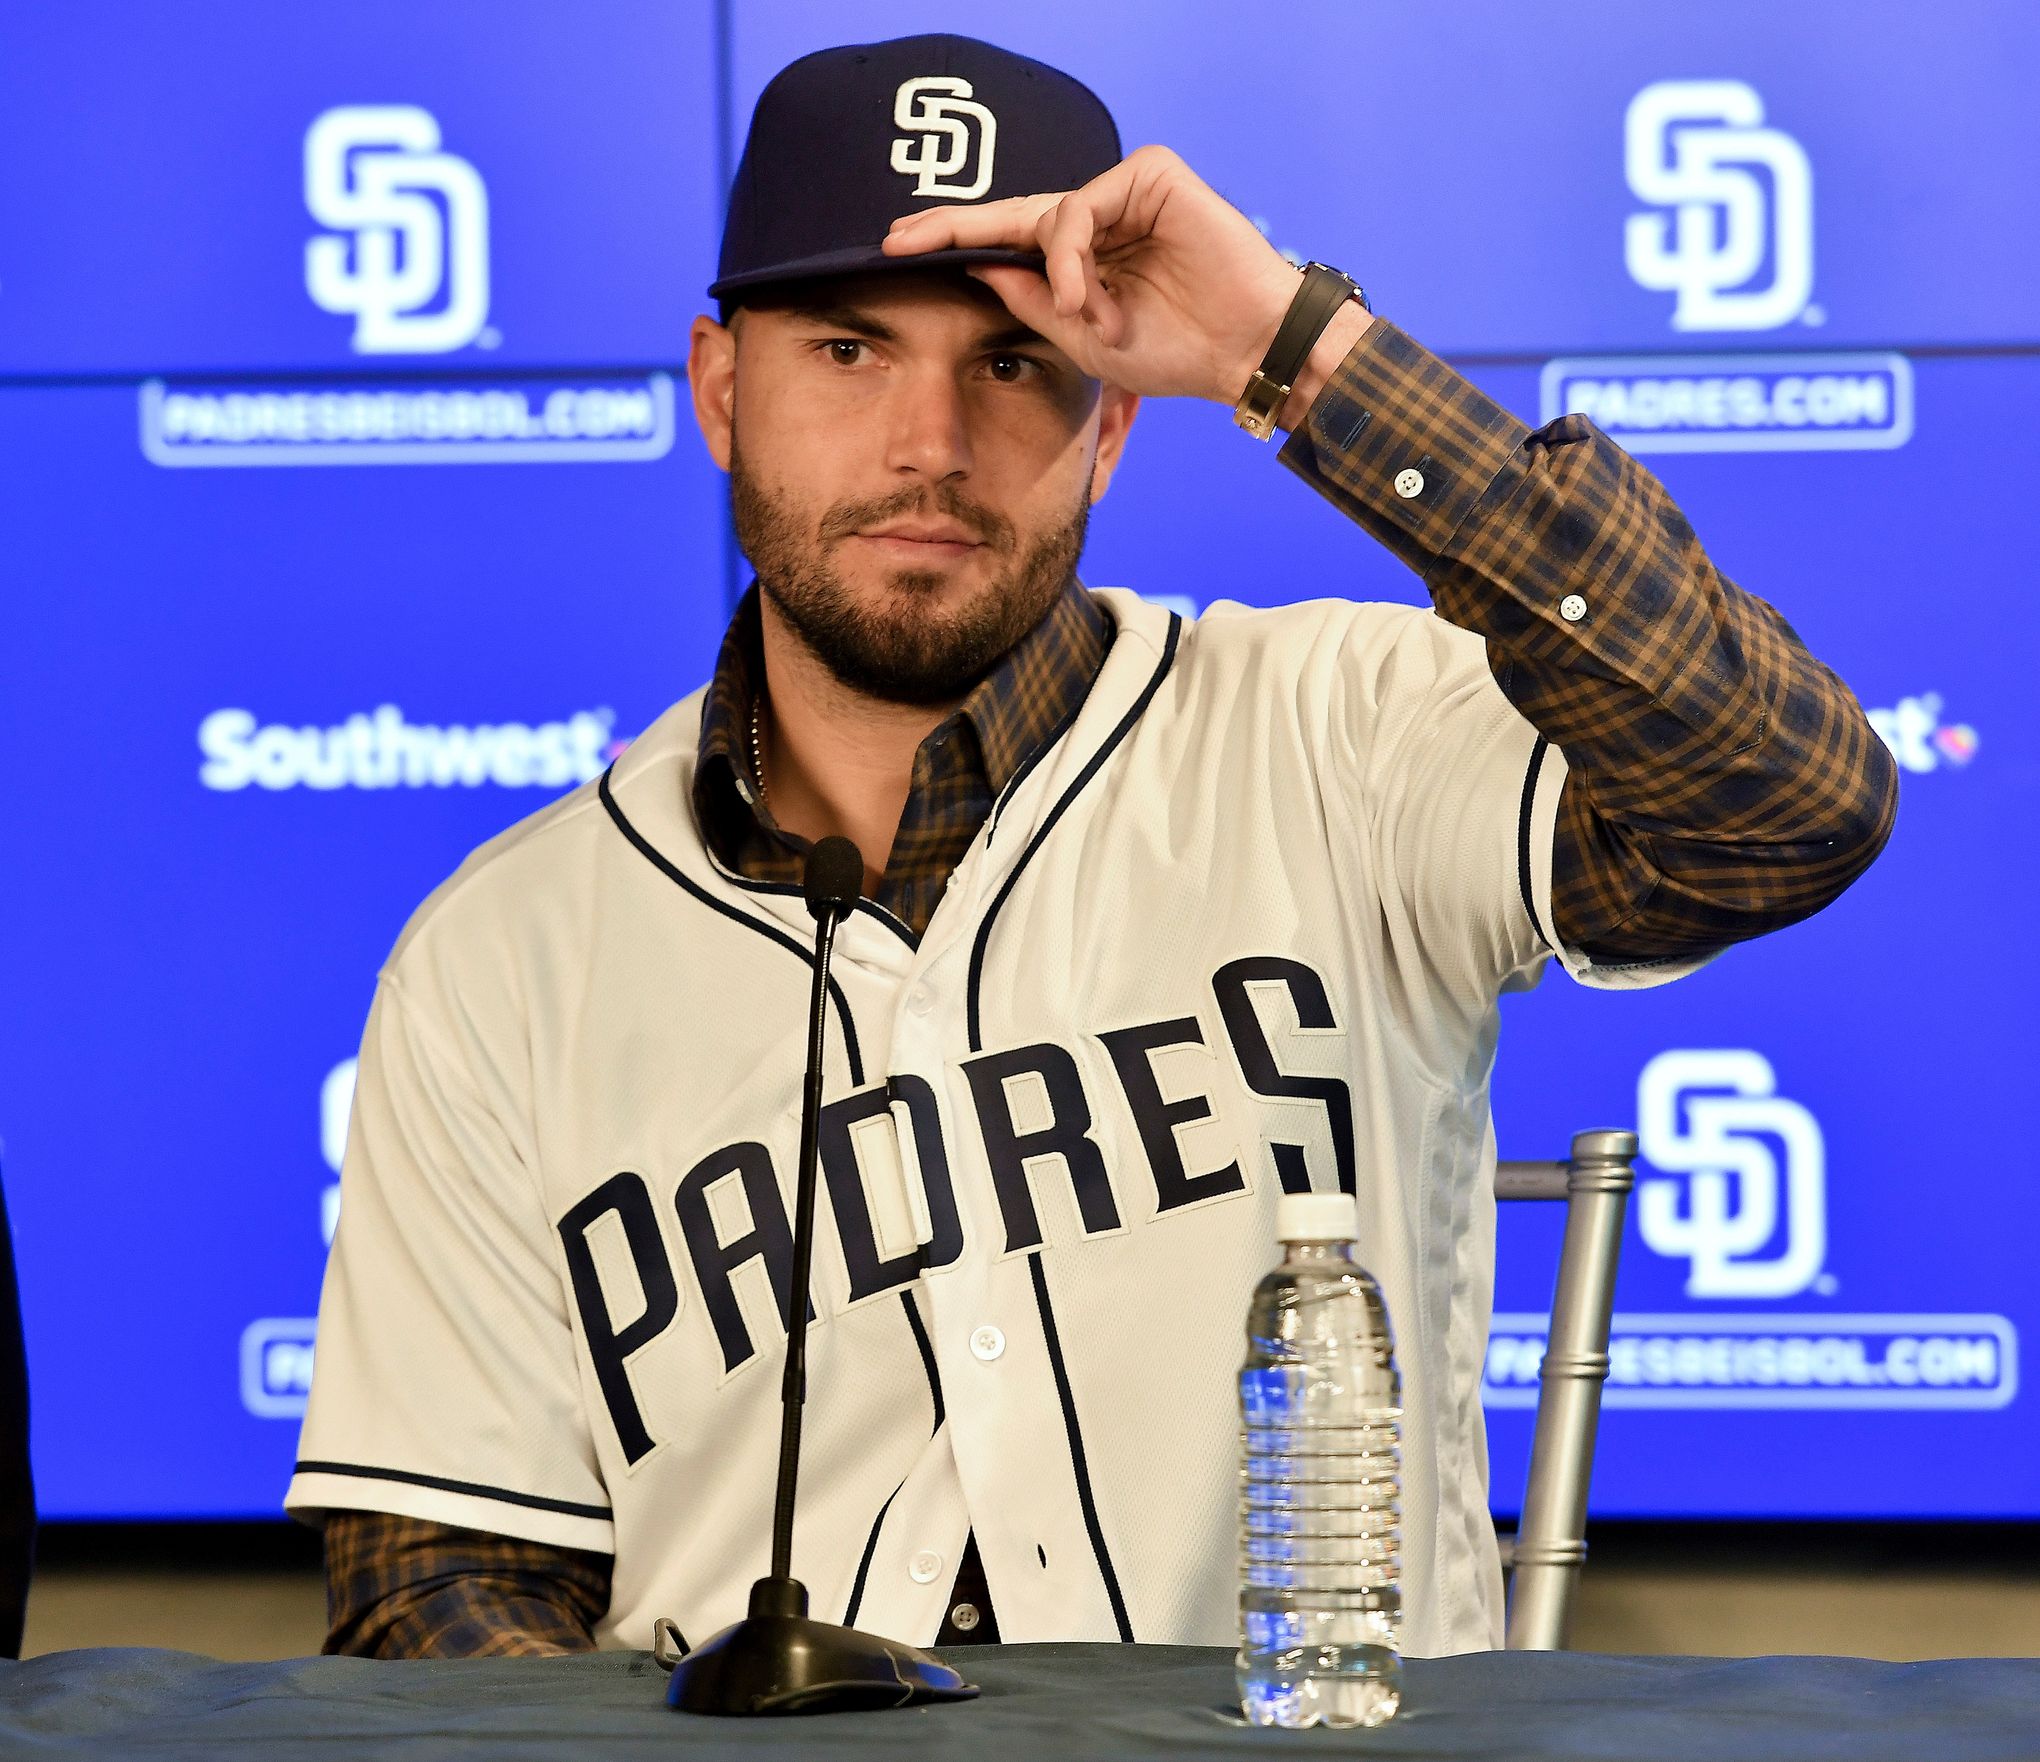 Eric Hosmer signs 8-year, $144 million deal with Padres, per